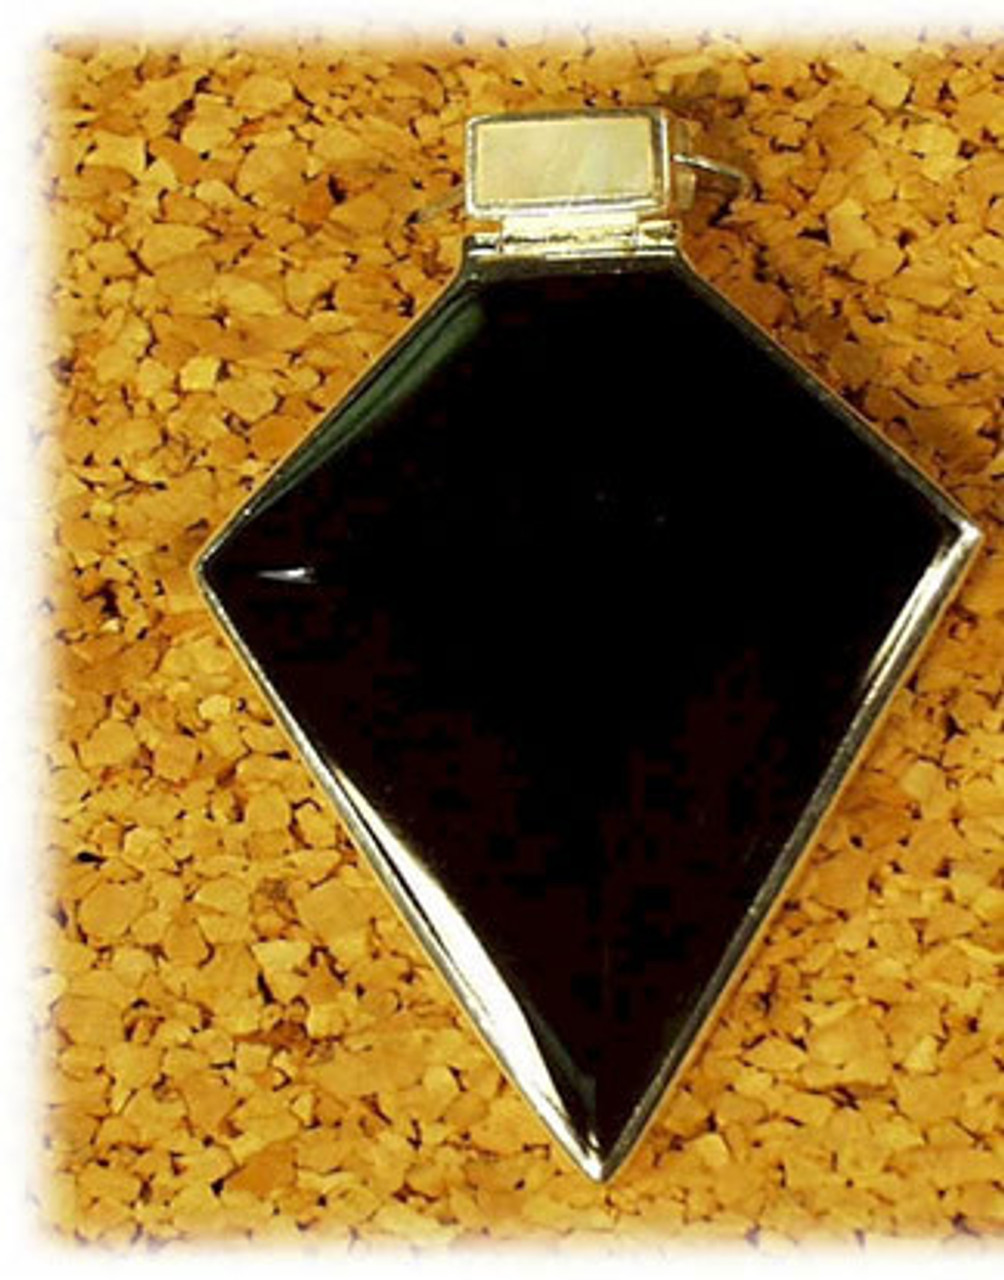 HS-190BO: Black Onyx Pendant Mounted in Sterling Sliver, Engravable Area, 1-1/4 inch x 1-1/2 inch.